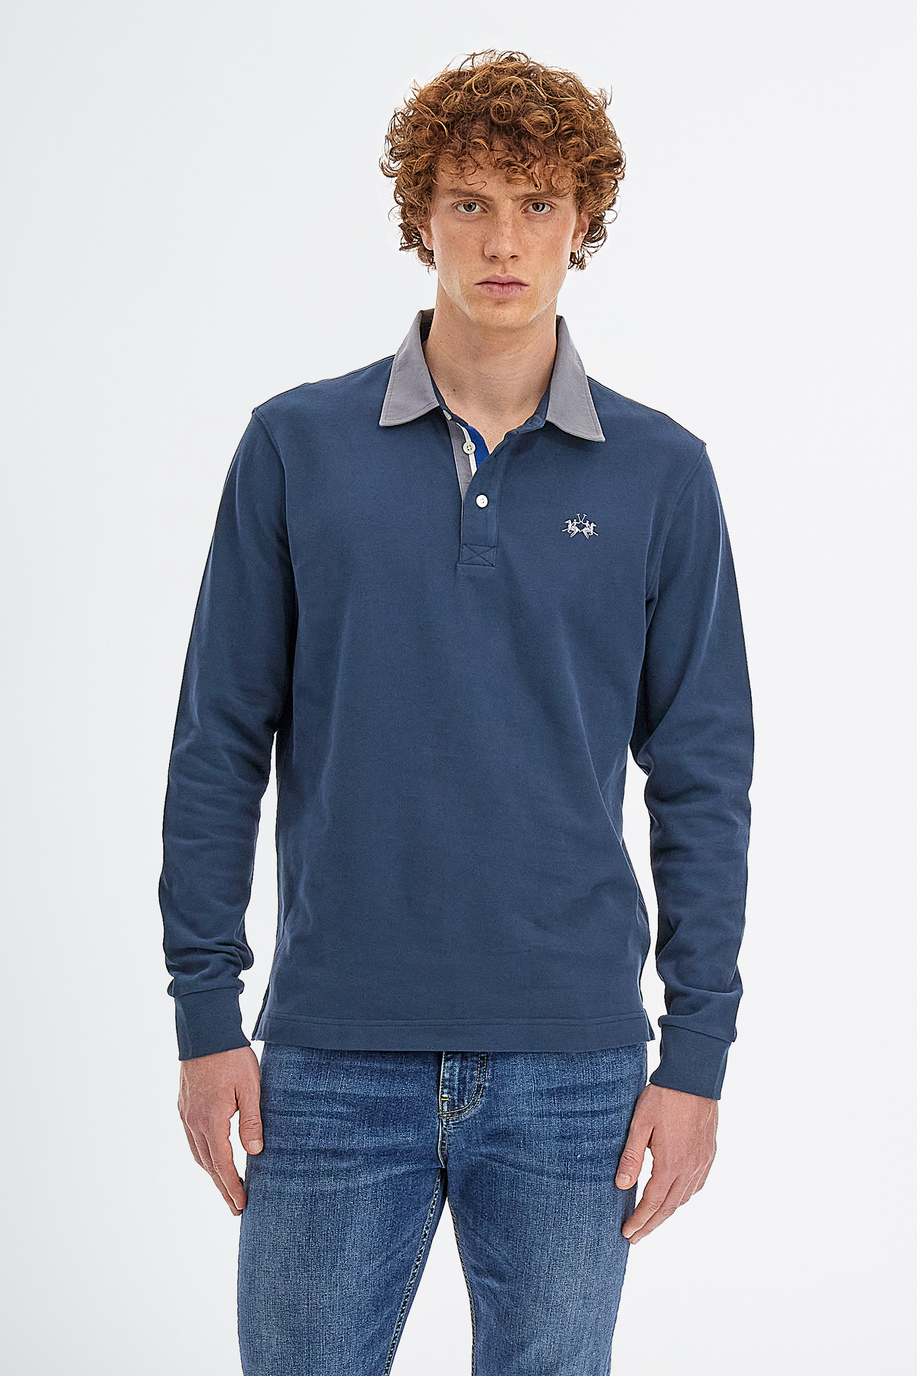 Men’s polo shirt with long sleeves in regular fit jersey cotton - -30% | step 3 | US | La Martina - Official Online Shop